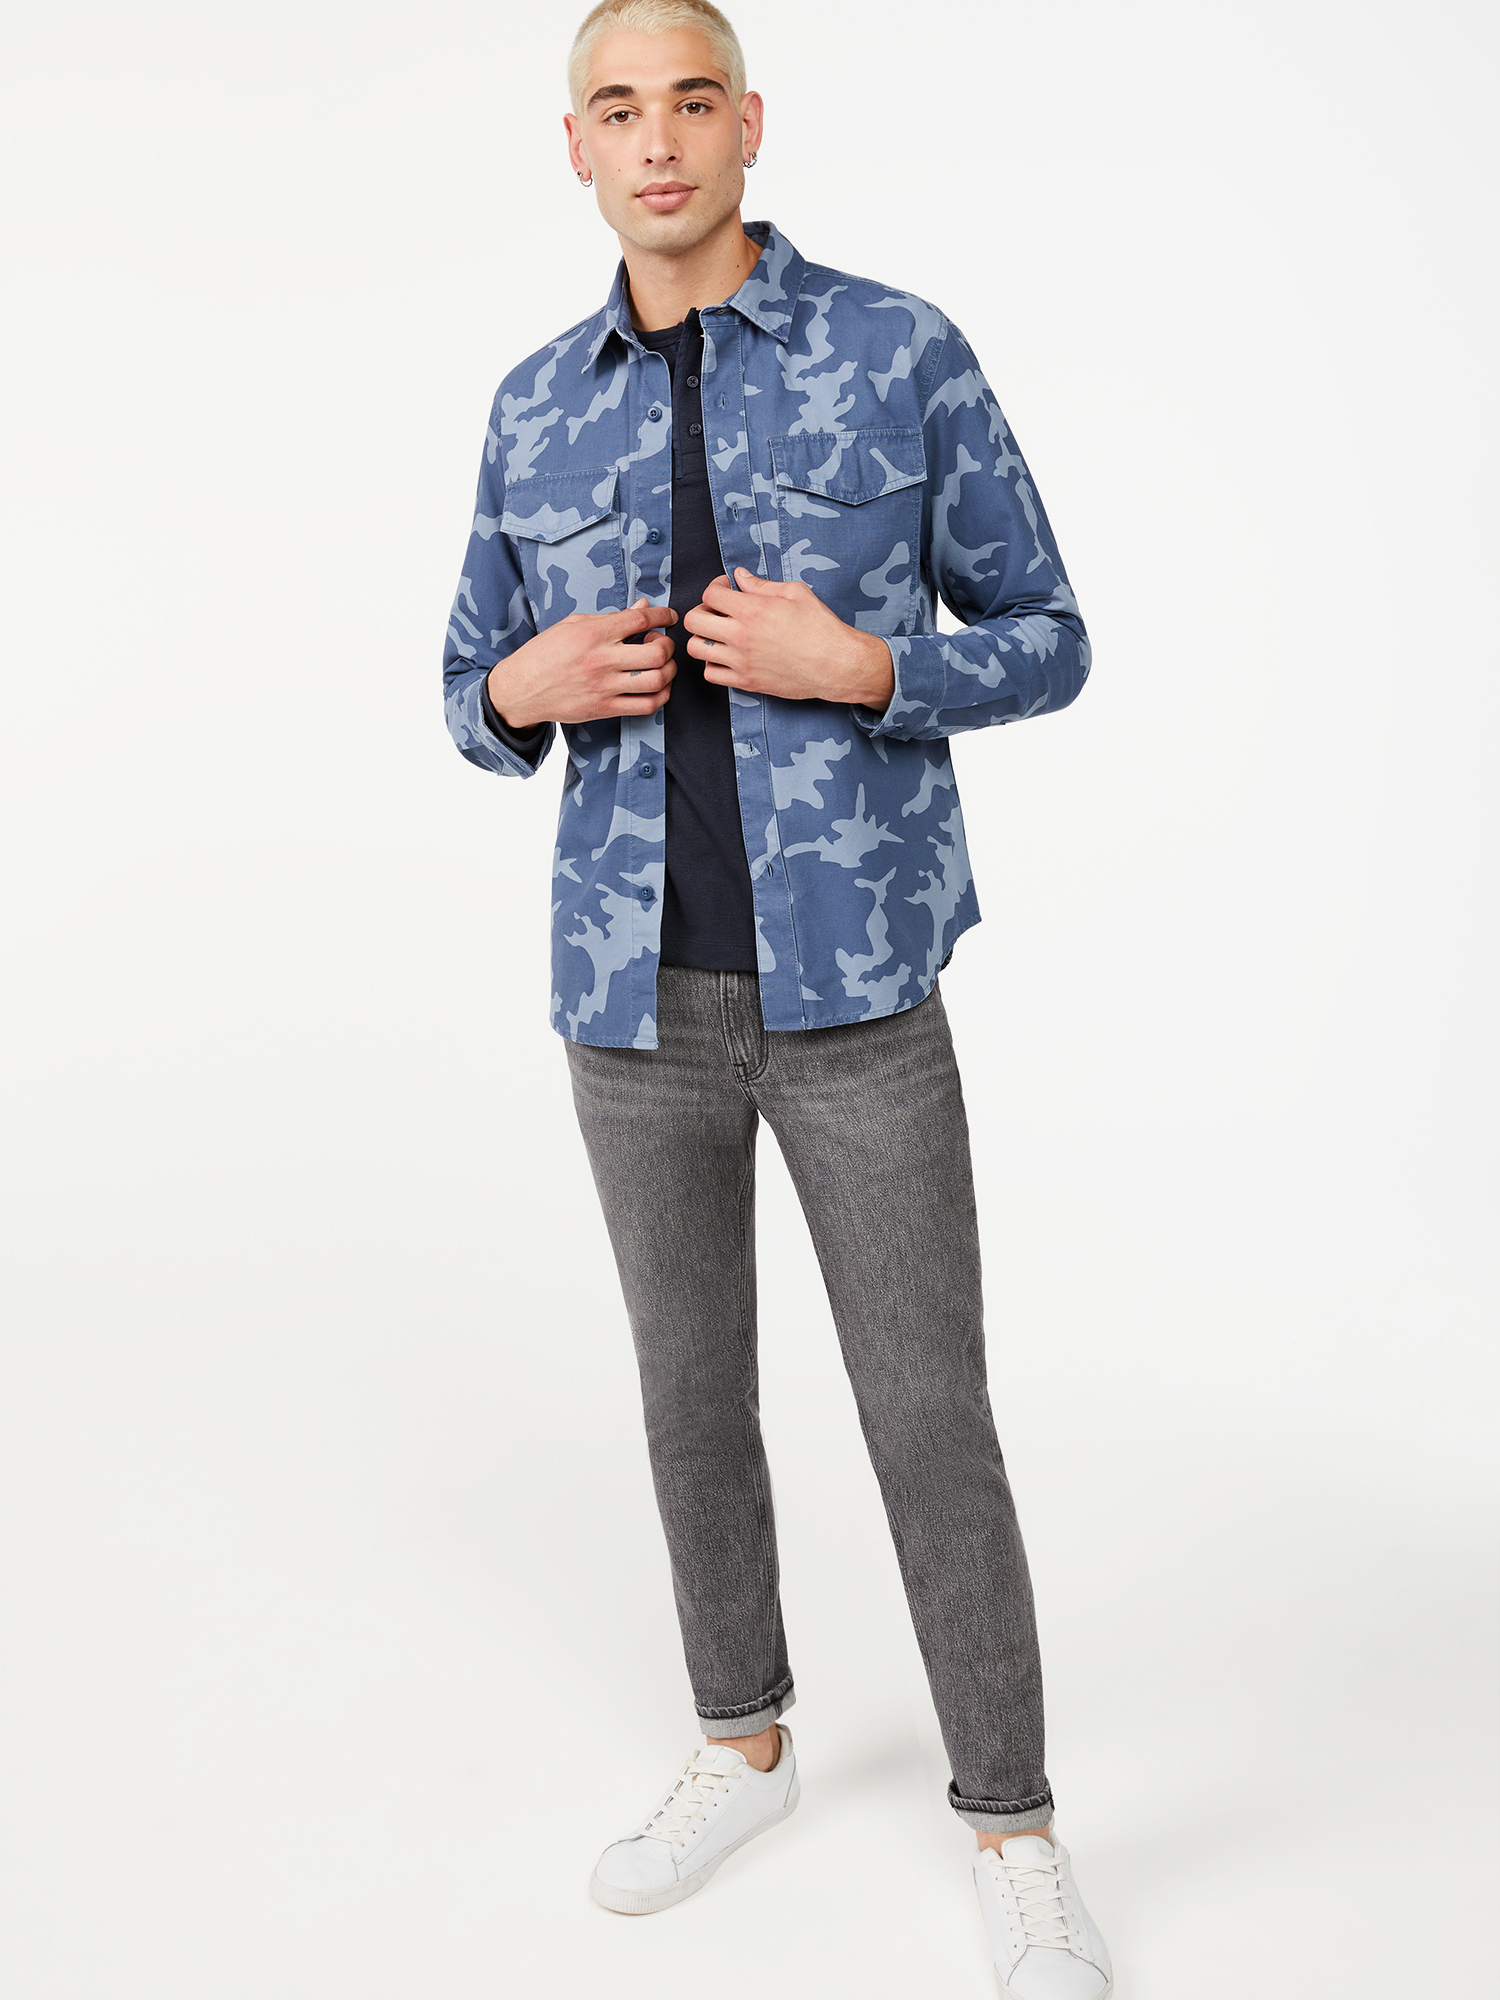 Free Assembly Men's Cotton Canvas Shirt Jacket - image 2 of 5